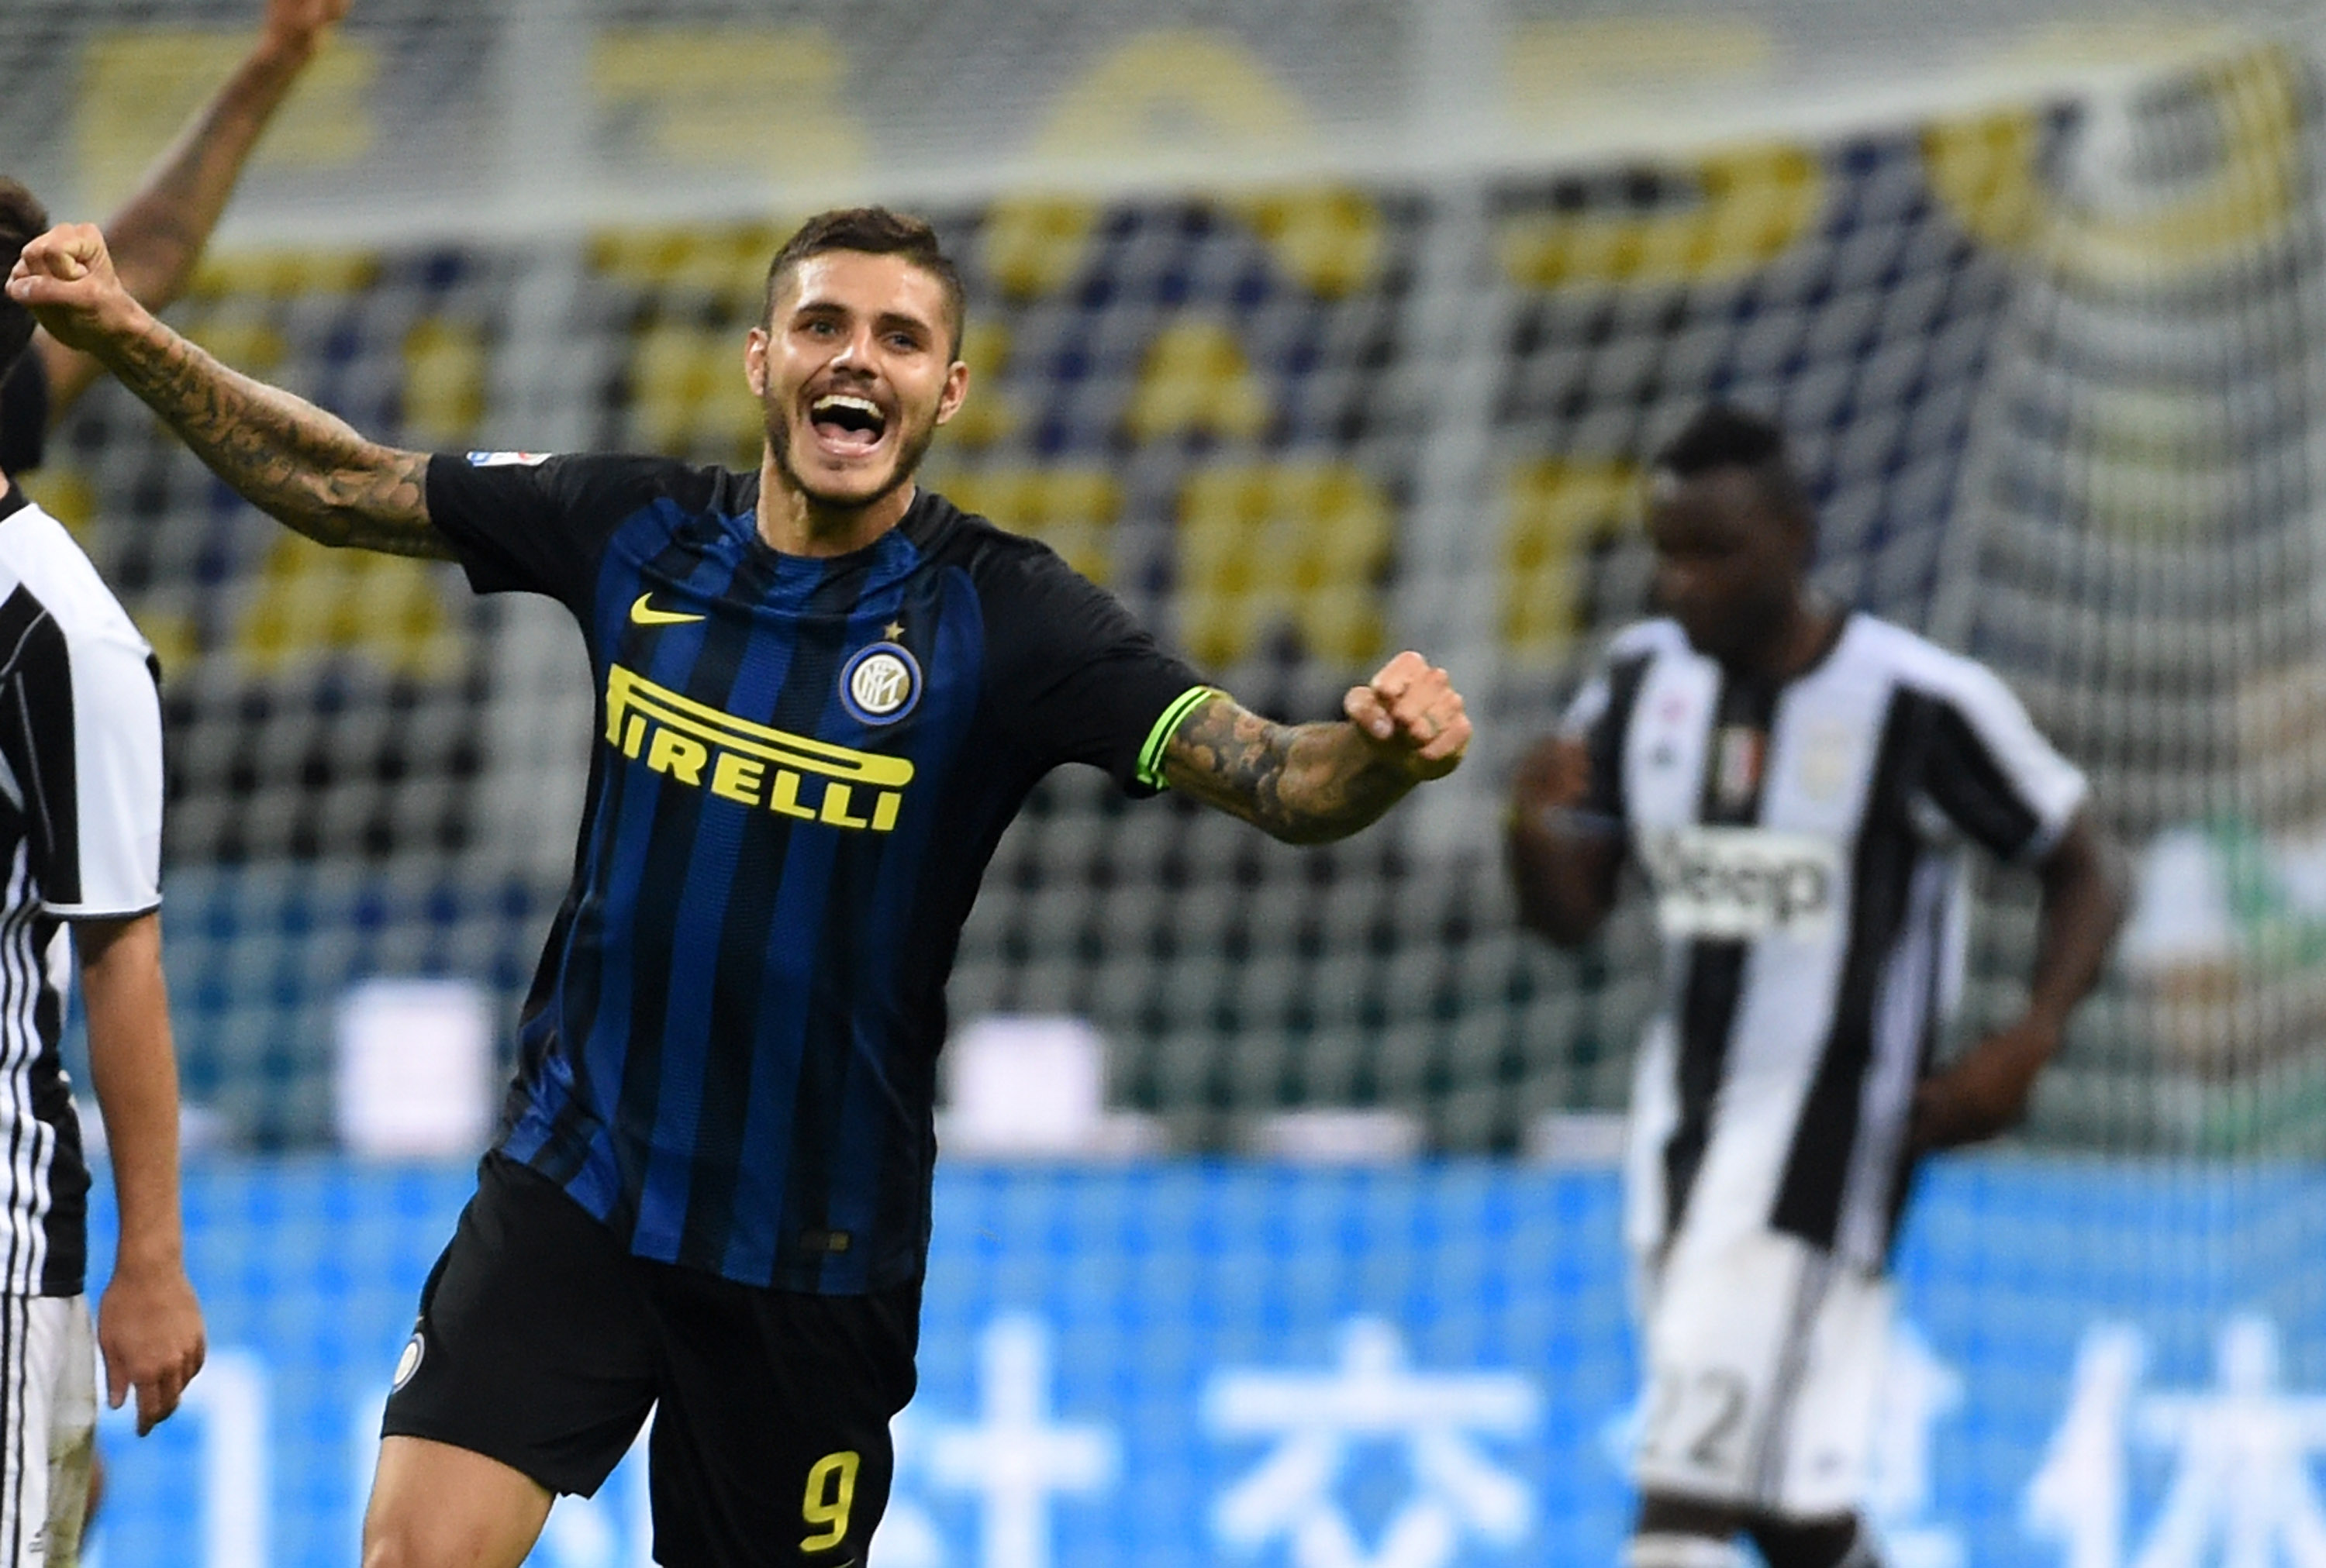 Icardi to Premium Sport: “We were tired, but we played well.”